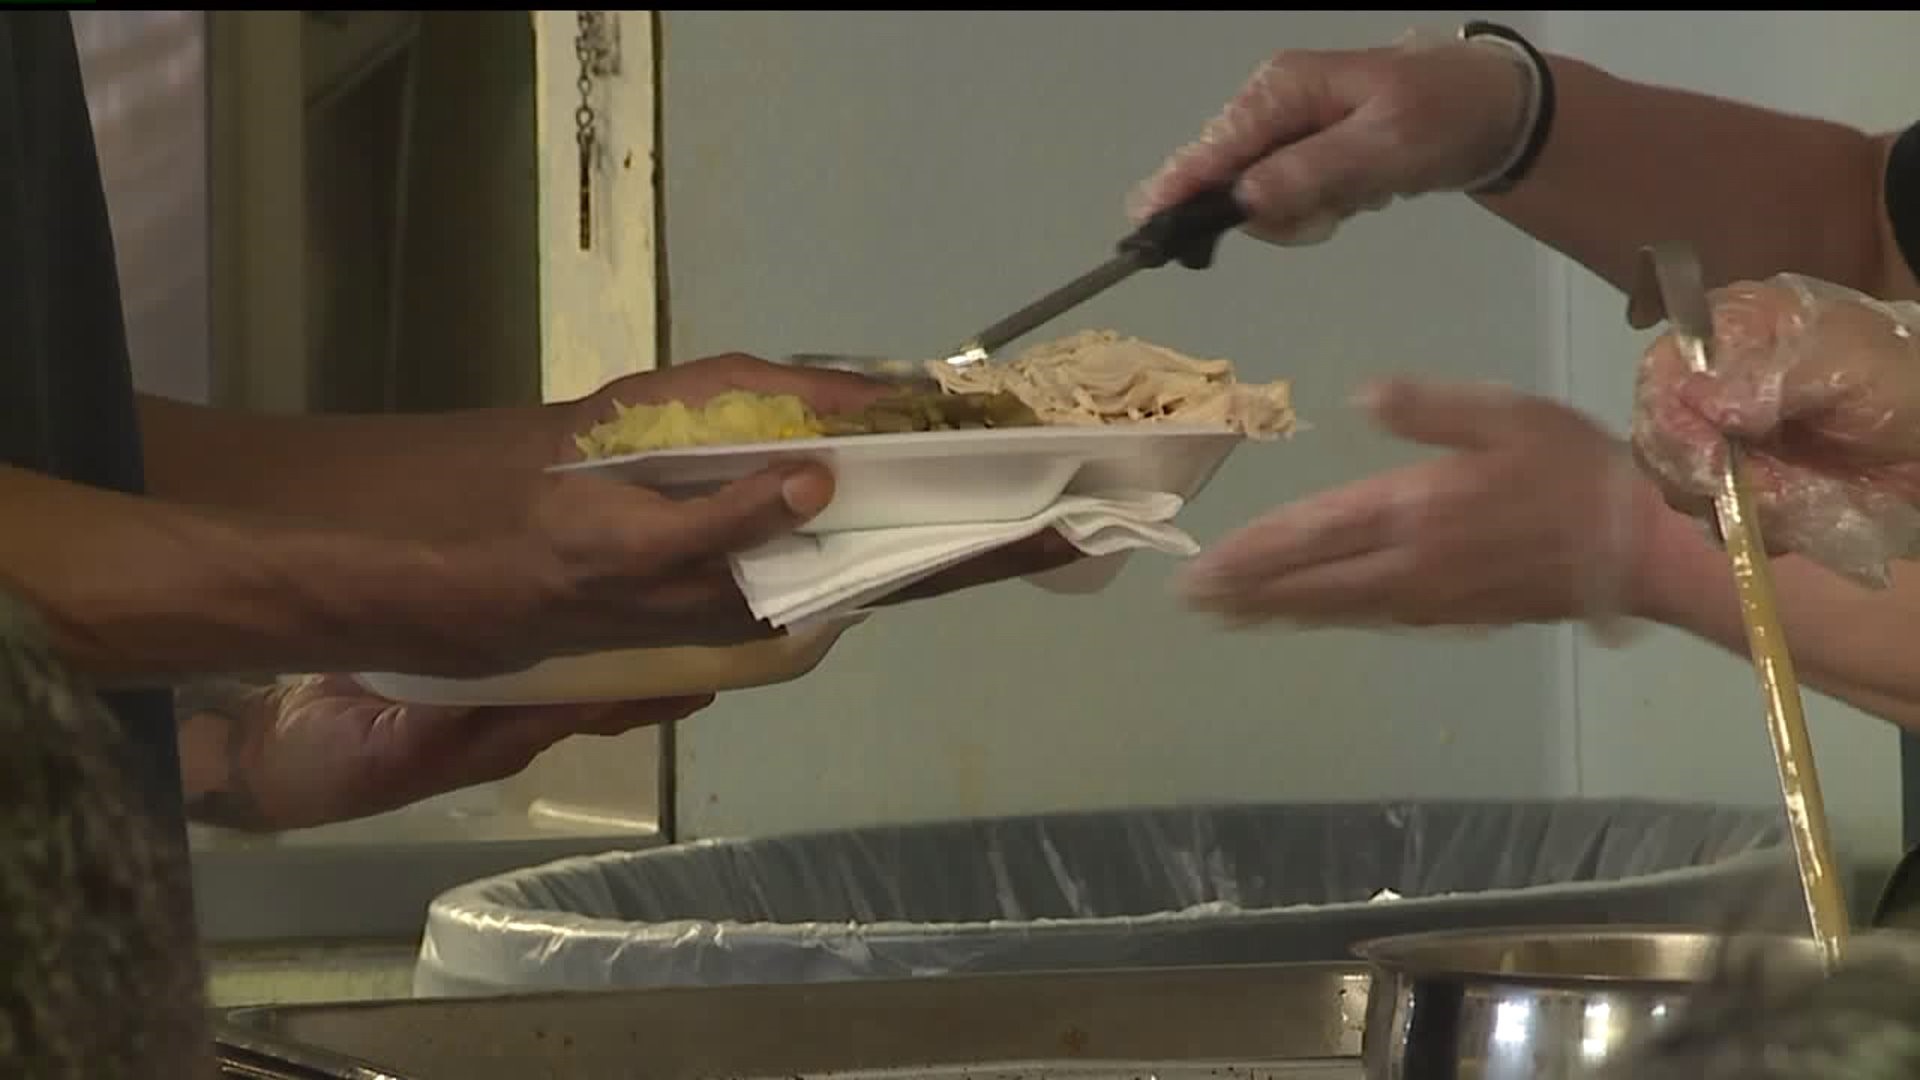 Harrisburg Bethesda Mission serves a Easter feast to those in need